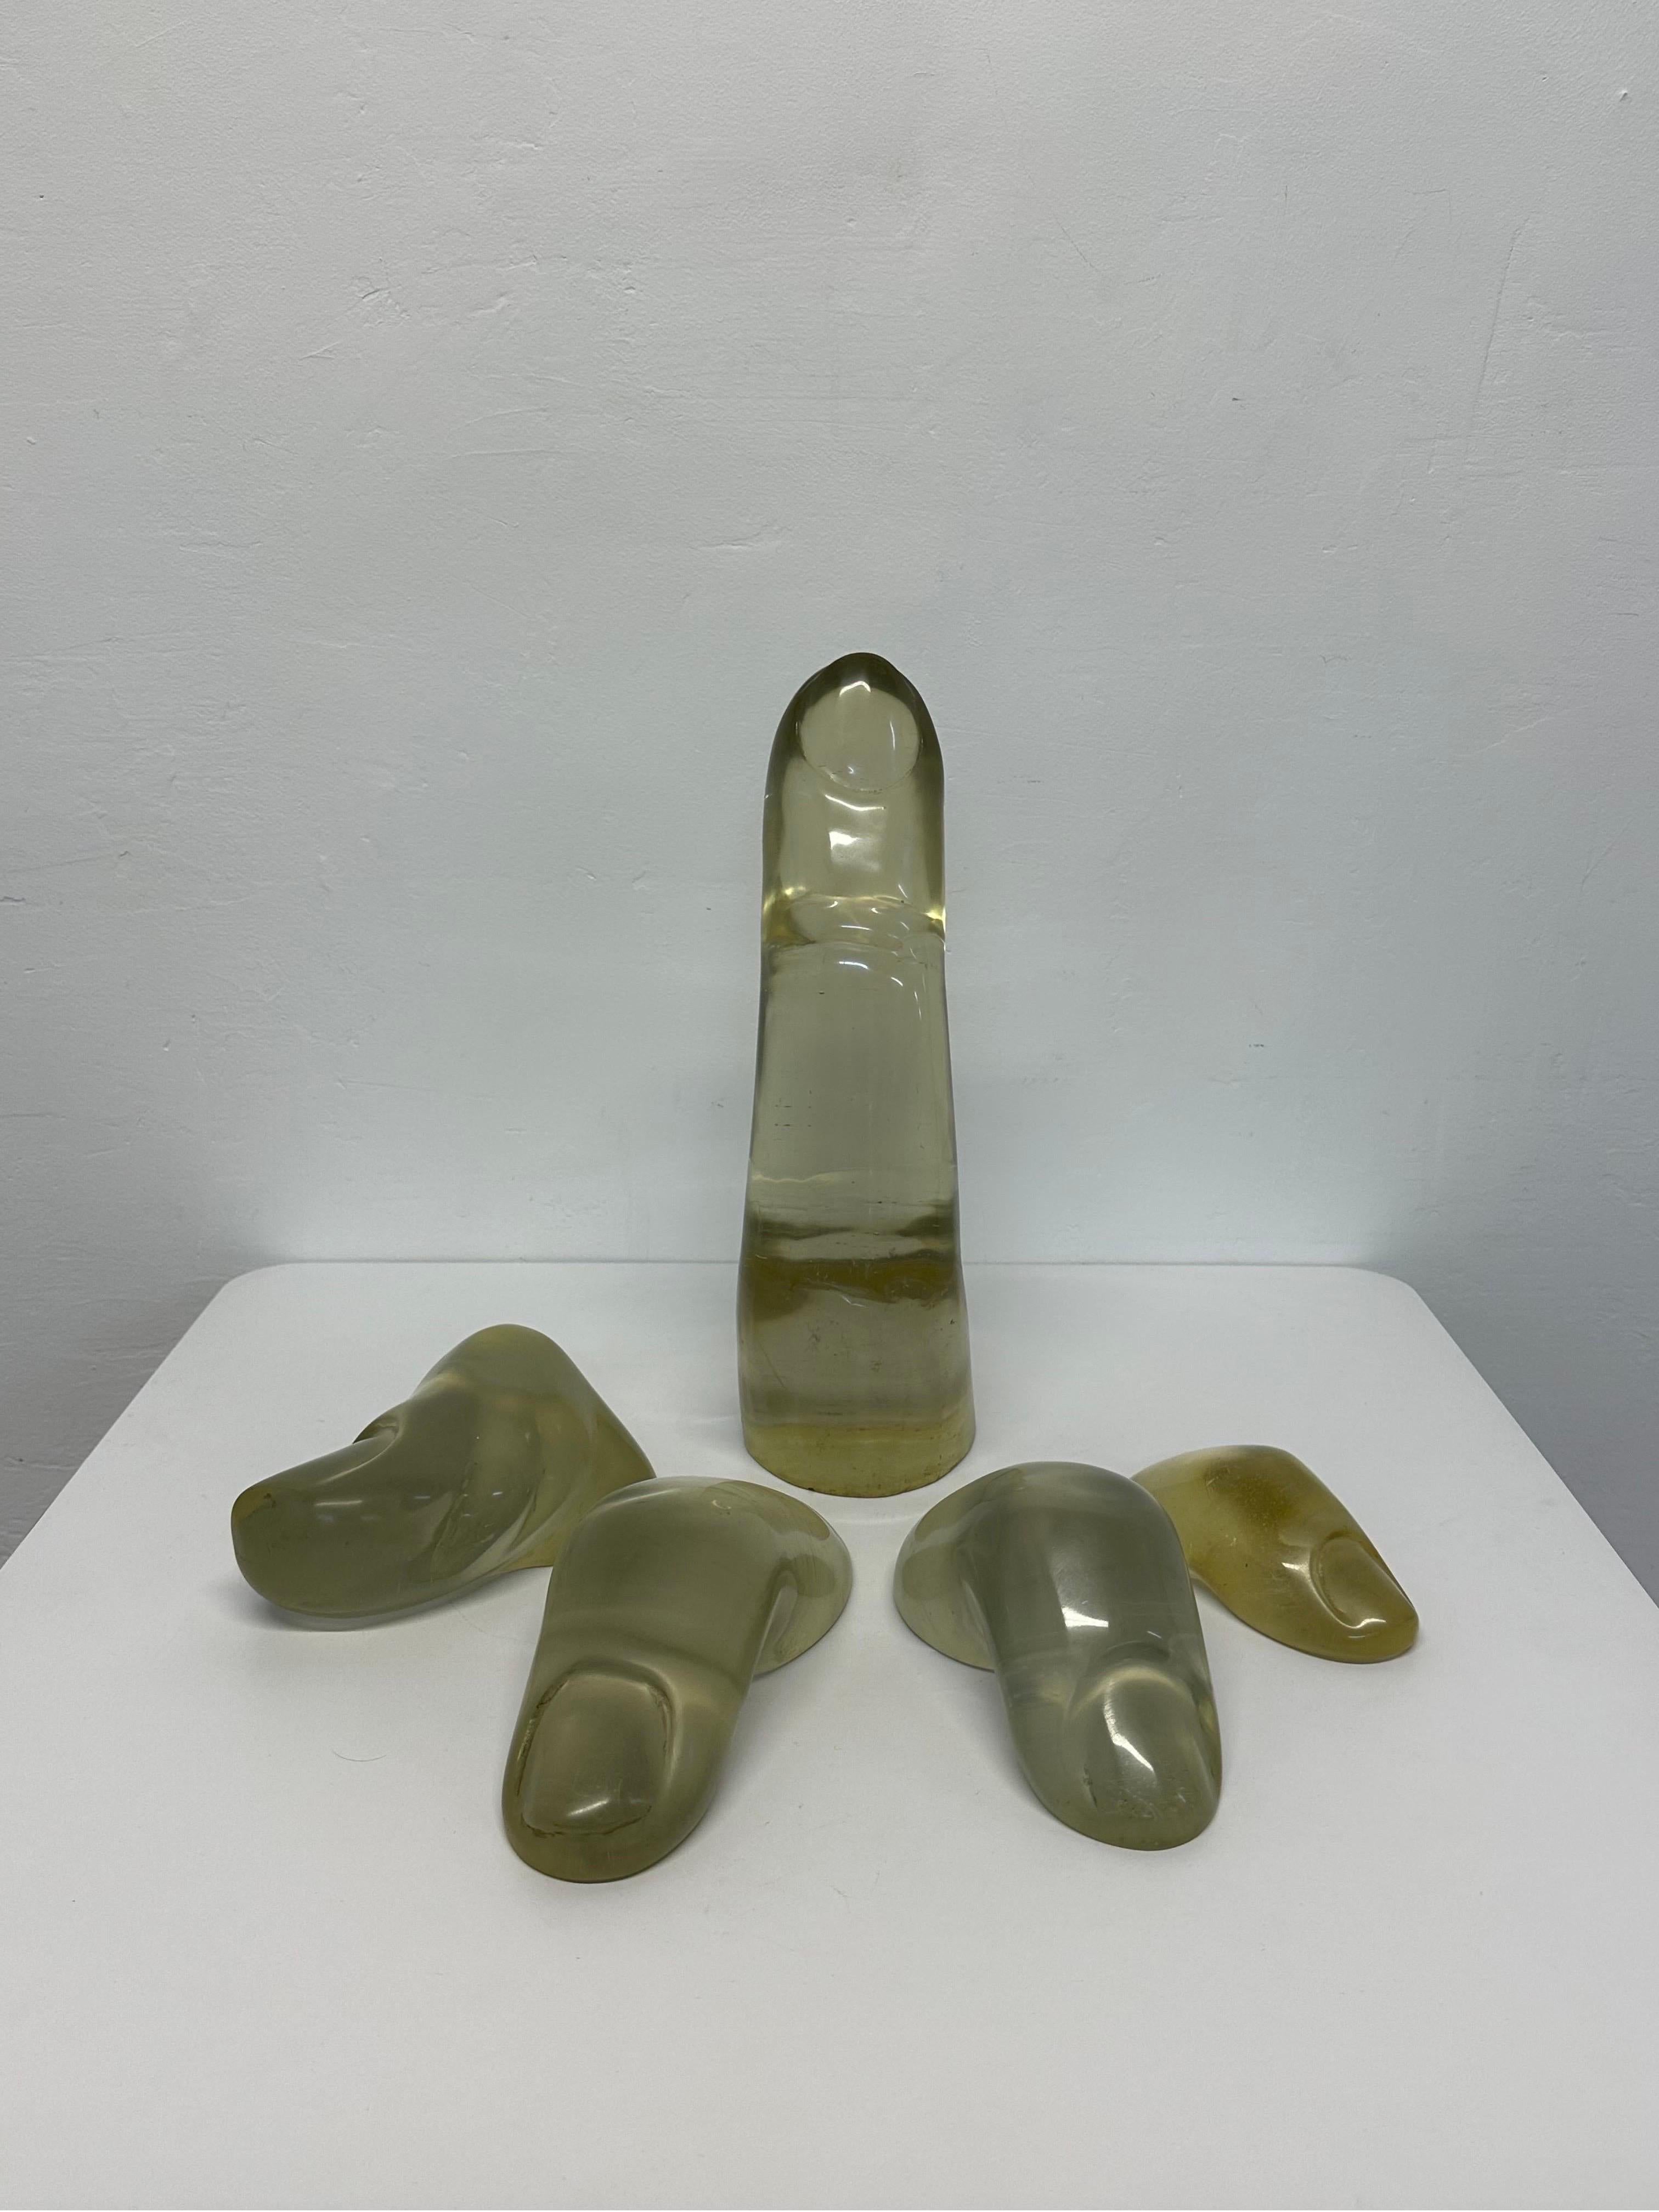 Brazilian modern acrylic / lucite table sculpture of five fingers with the middle finger extended. Signed by unknown artist.